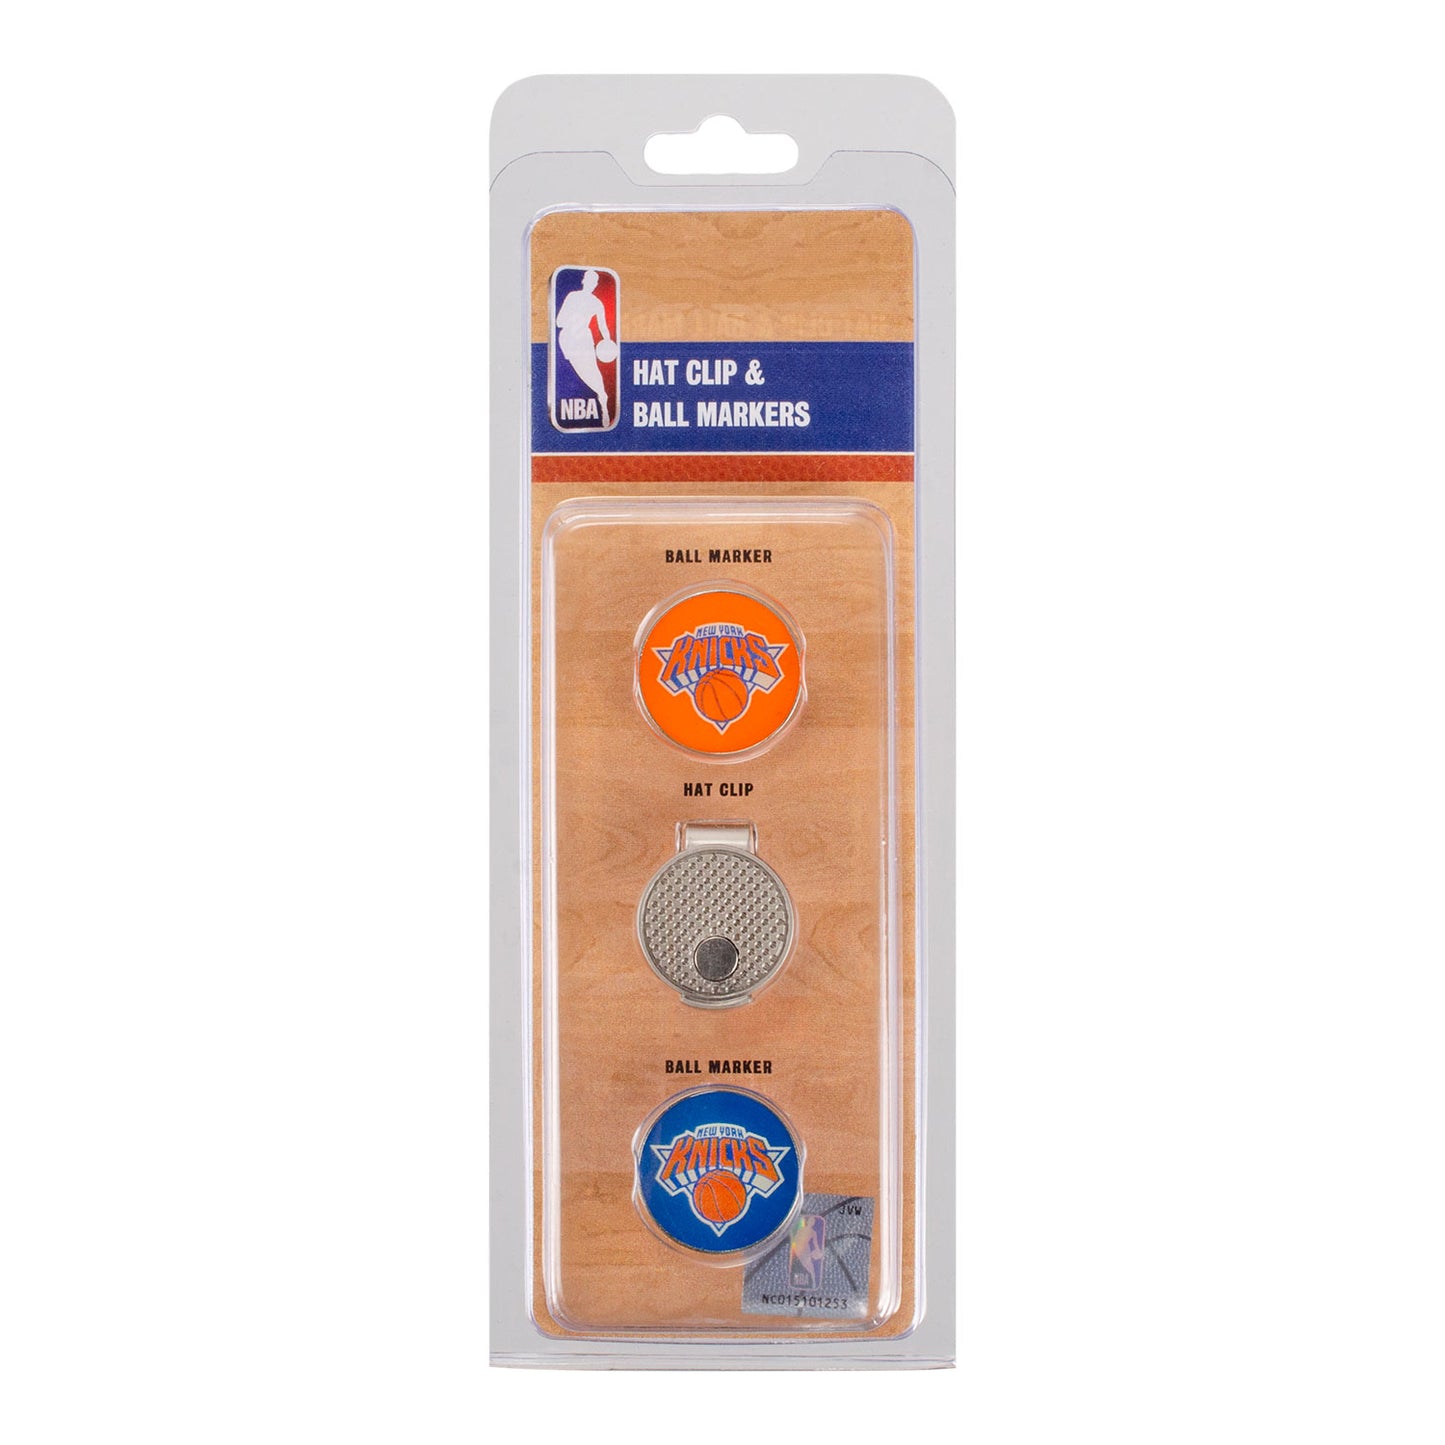 Wincraft Knicks Hat Clip & Markers